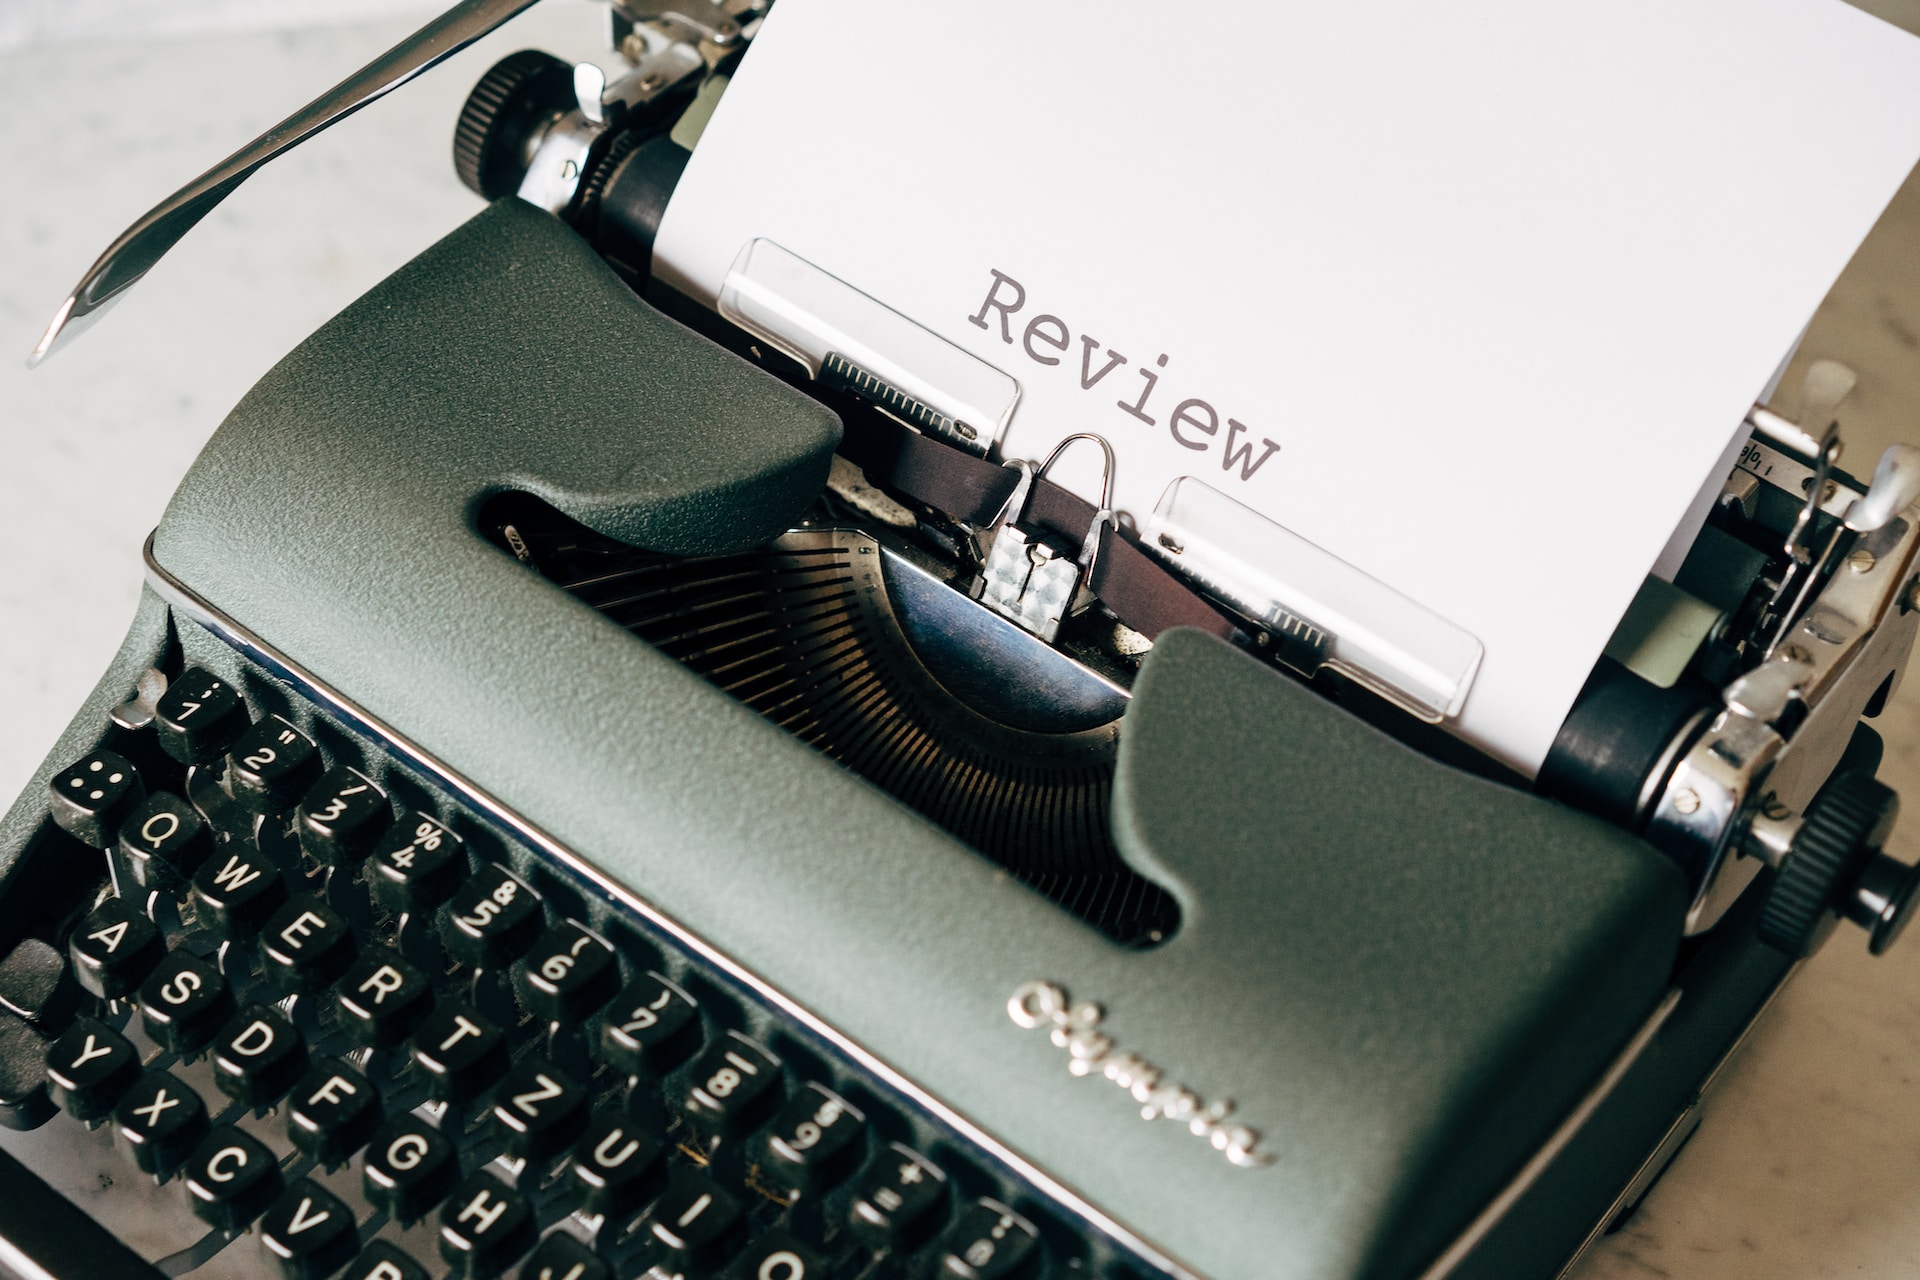 Past Year Review. Image of a typewriter with the word "review" written on a piece of paper